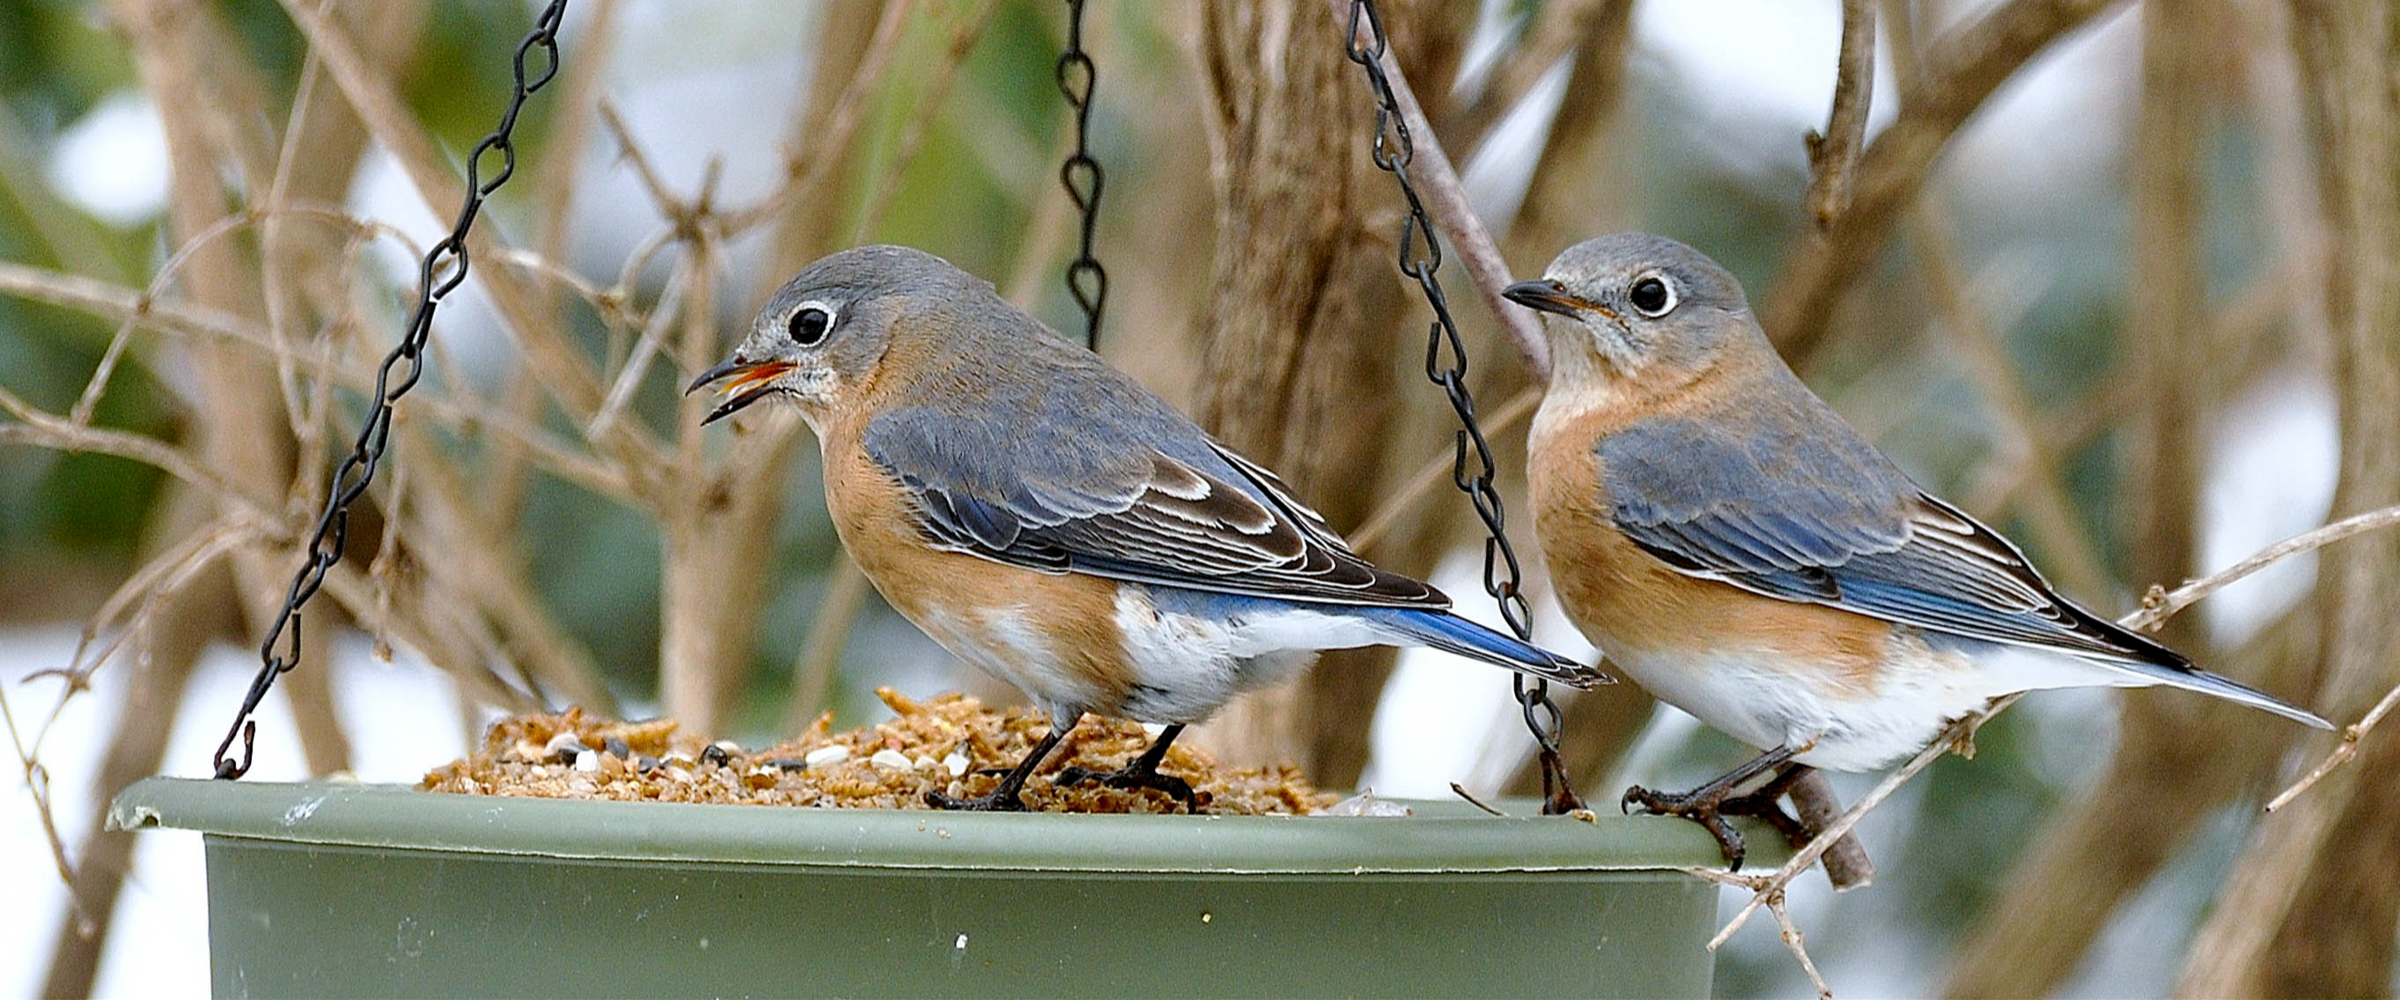 A pair of Eastern Bluebirds in their faded winter plumage perch on a dull green dog-bowl shaped feeder, suspended by metal chains.